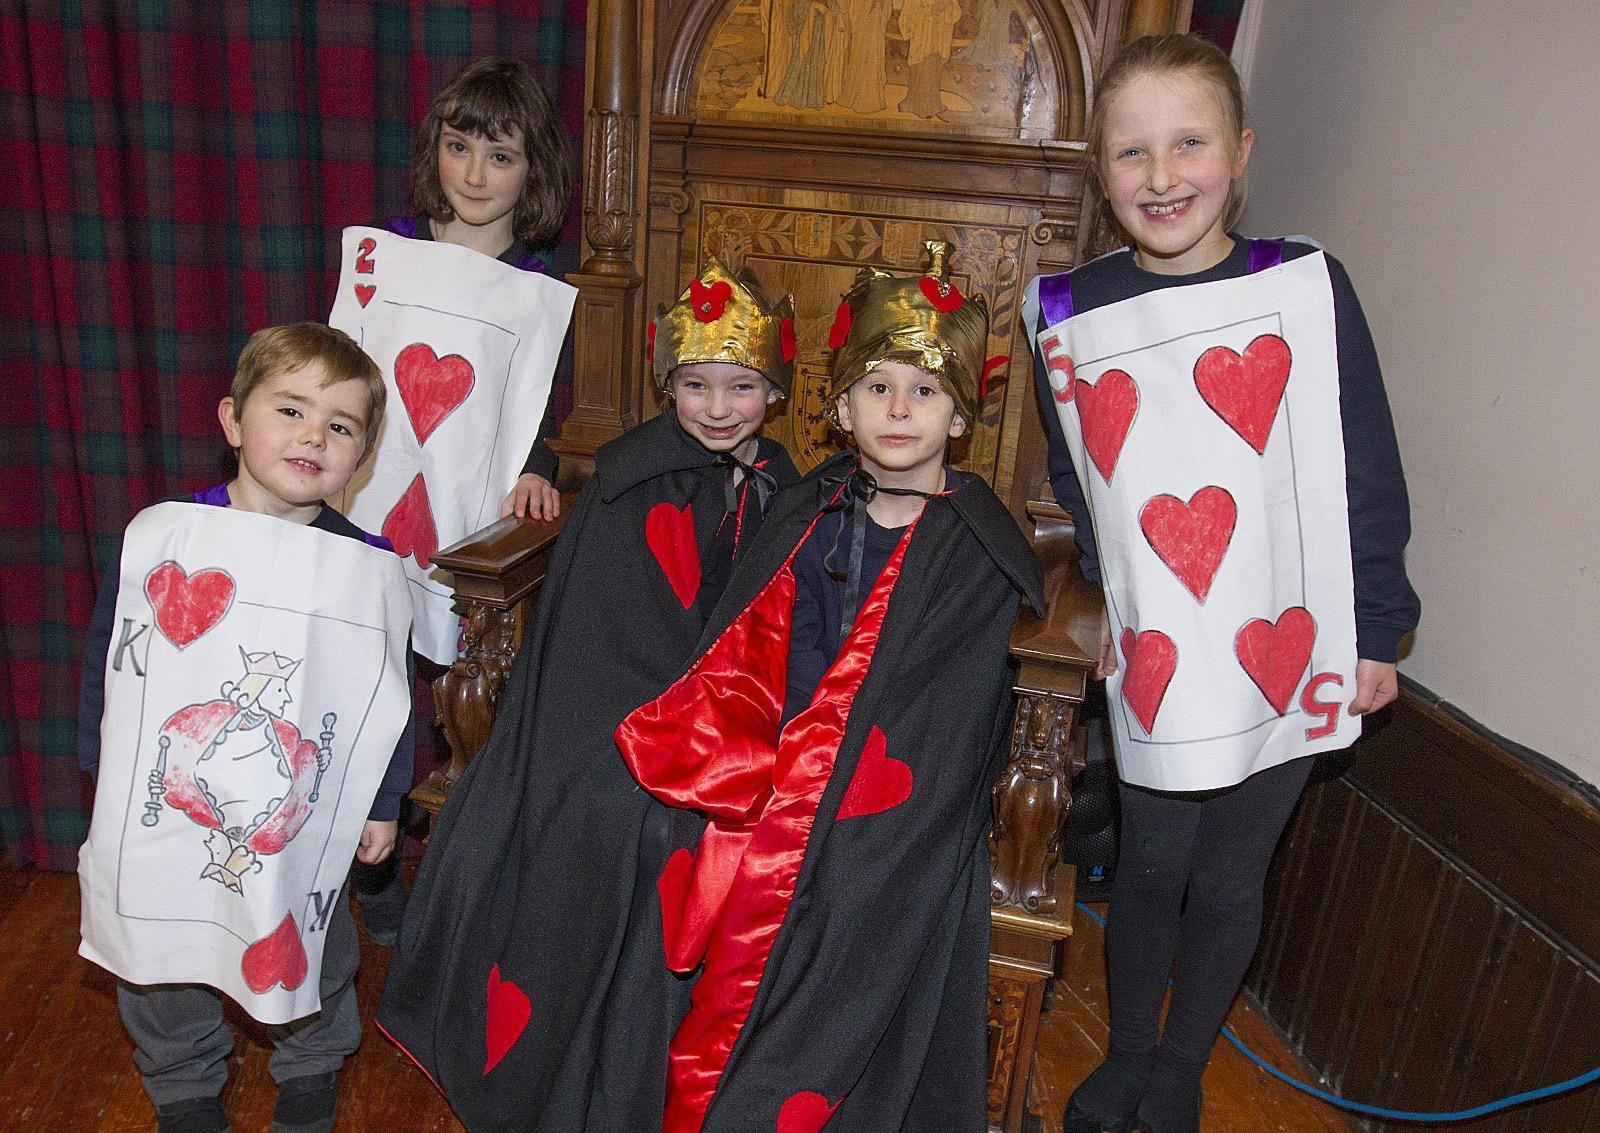 Knave Finley Mitchell, 2 of Hearts, Ada Davidson, Queen Isla Black, King Dylan Stanners and 5 of Hearts Fiona Mendyk